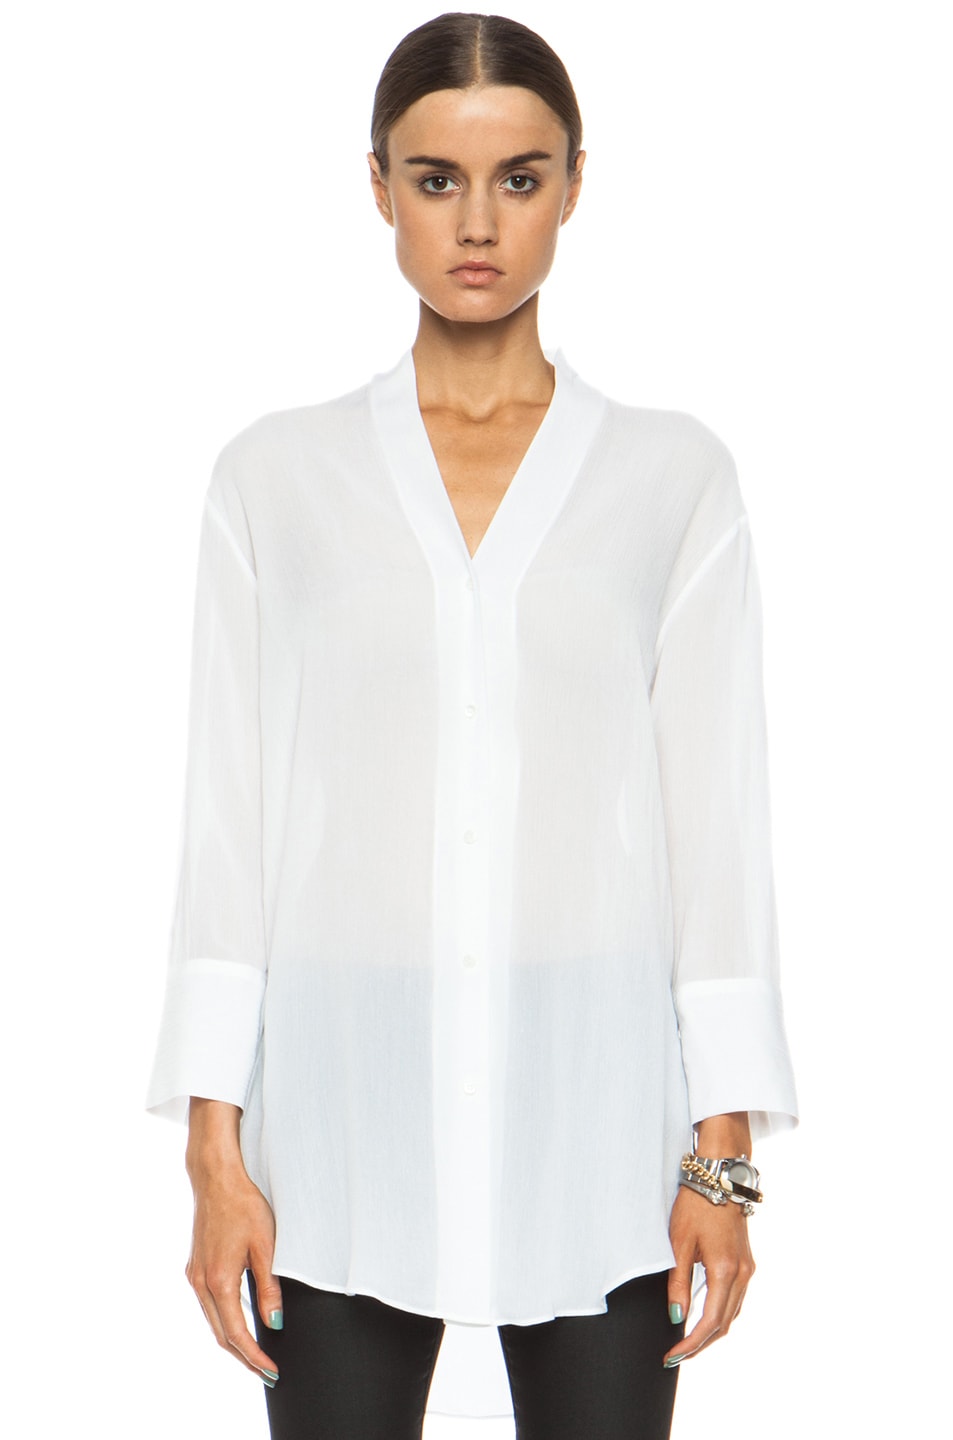 Helmut Lang Mist Oversized Viscose Button Down in Optic White | FWRD